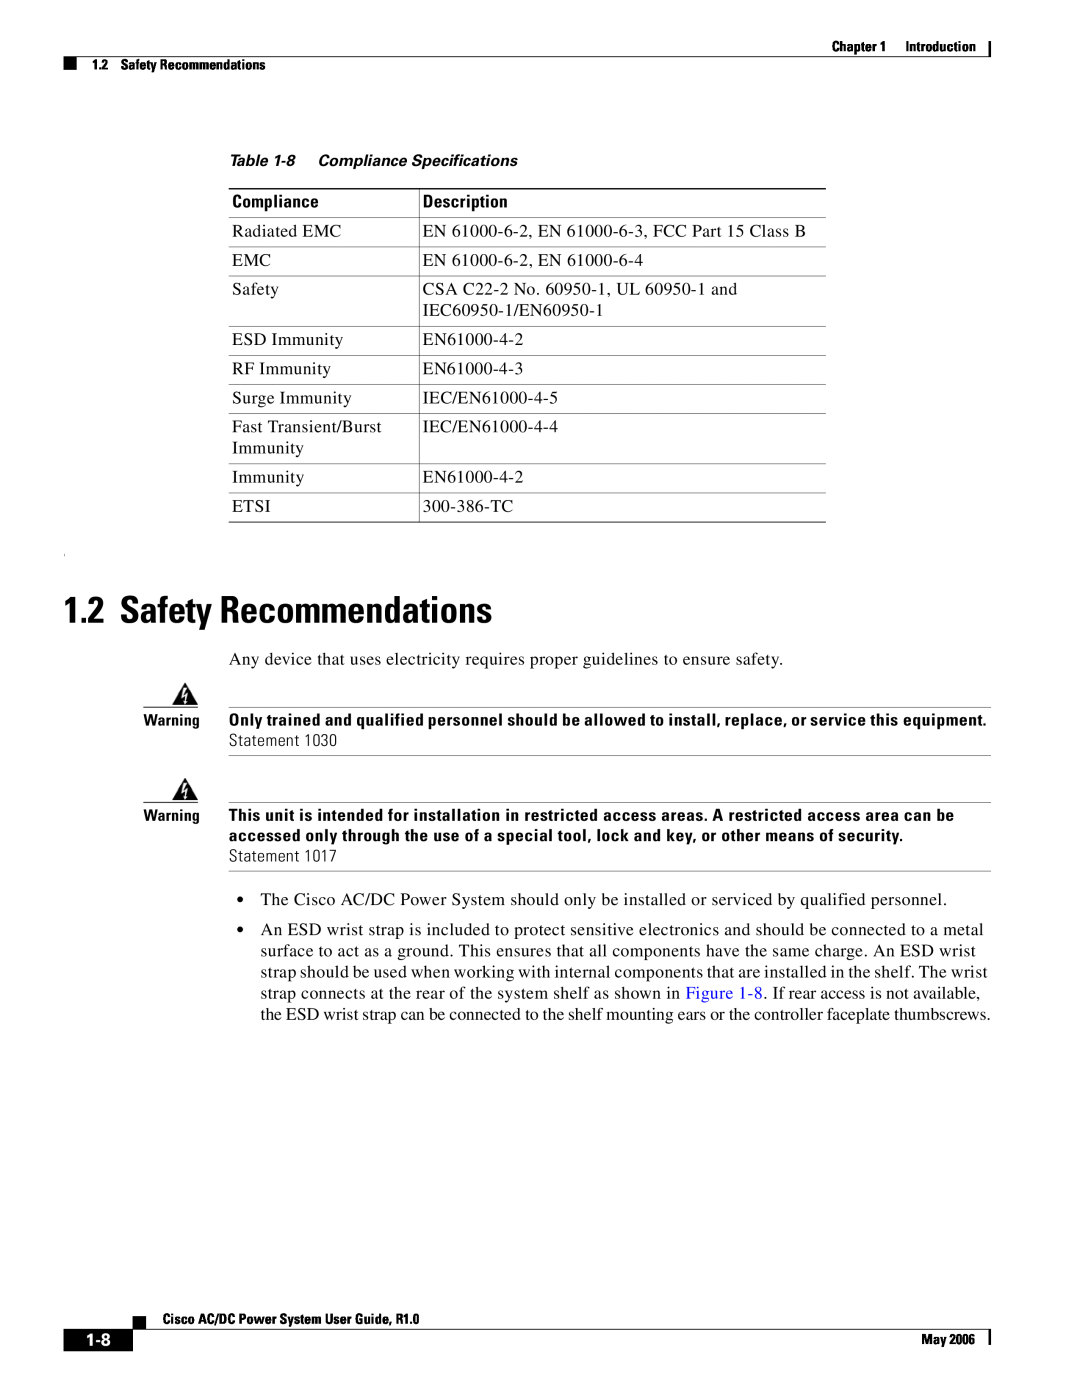 Cisco Systems 124792, 124778, 159330 manual Safety Recommendations, Statement 